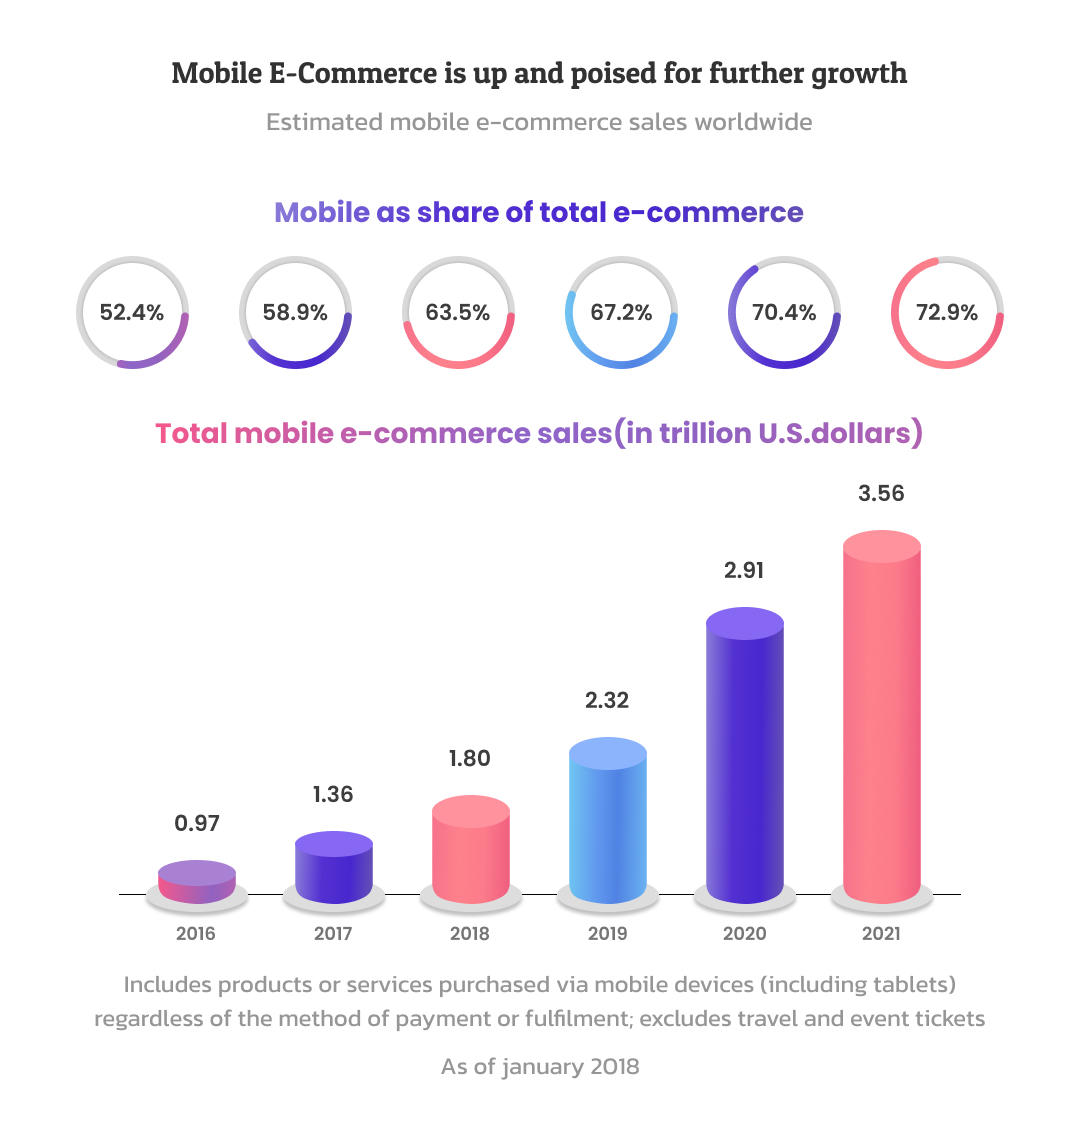 Mobile E-Commerce is up and poised for further growth